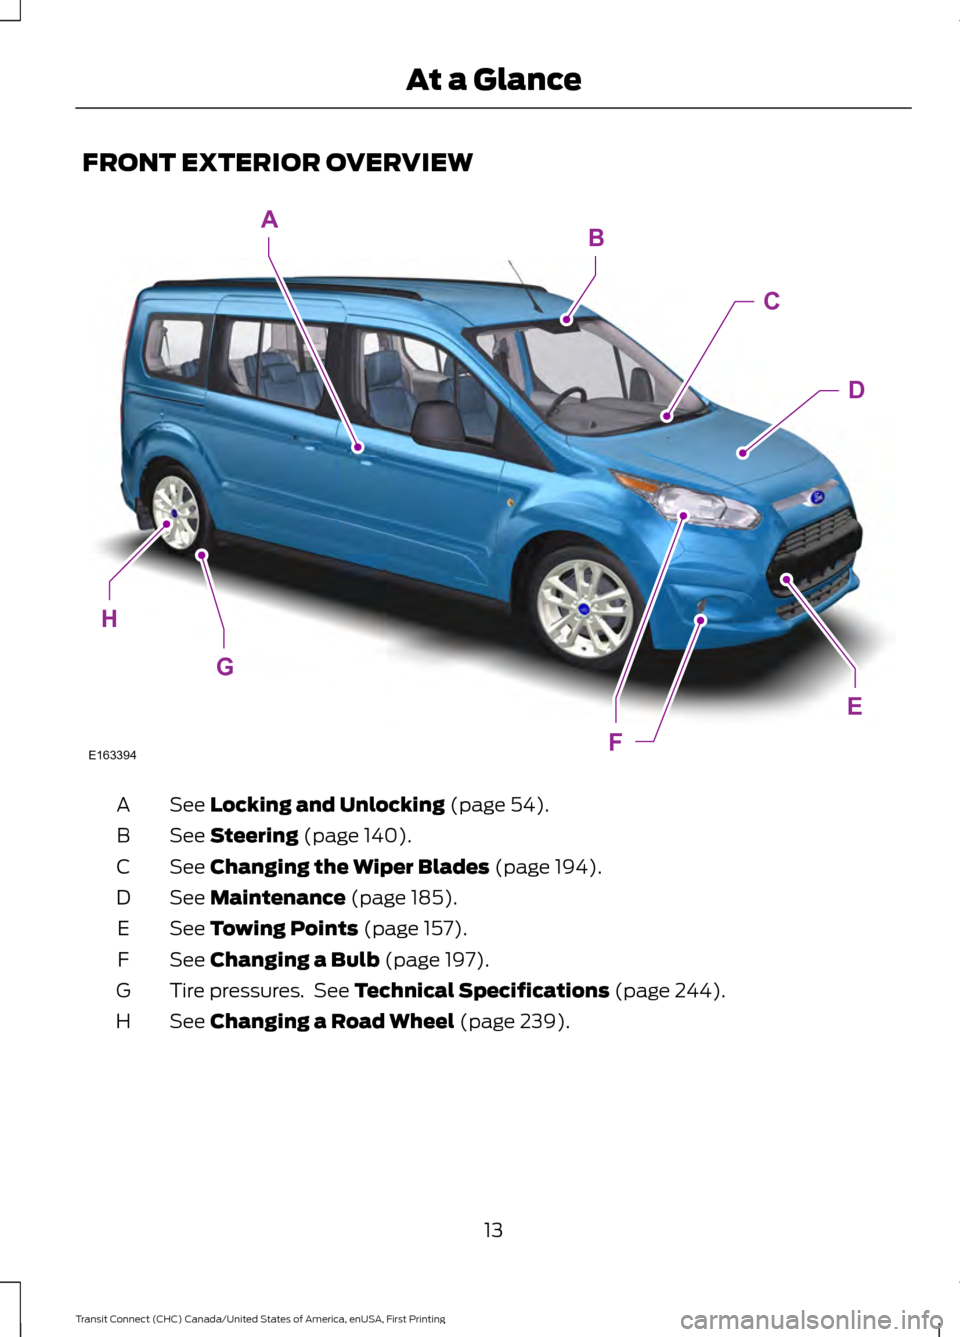 FORD TRANSIT CONNECT 2015 2.G Owners Manual FRONT EXTERIOR OVERVIEW
See Locking and Unlocking (page 54).
A
See 
Steering (page 140).
B
See 
Changing the Wiper Blades (page 194).
C
See 
Maintenance (page 185).
D
See 
Towing Points (page 157).
E
